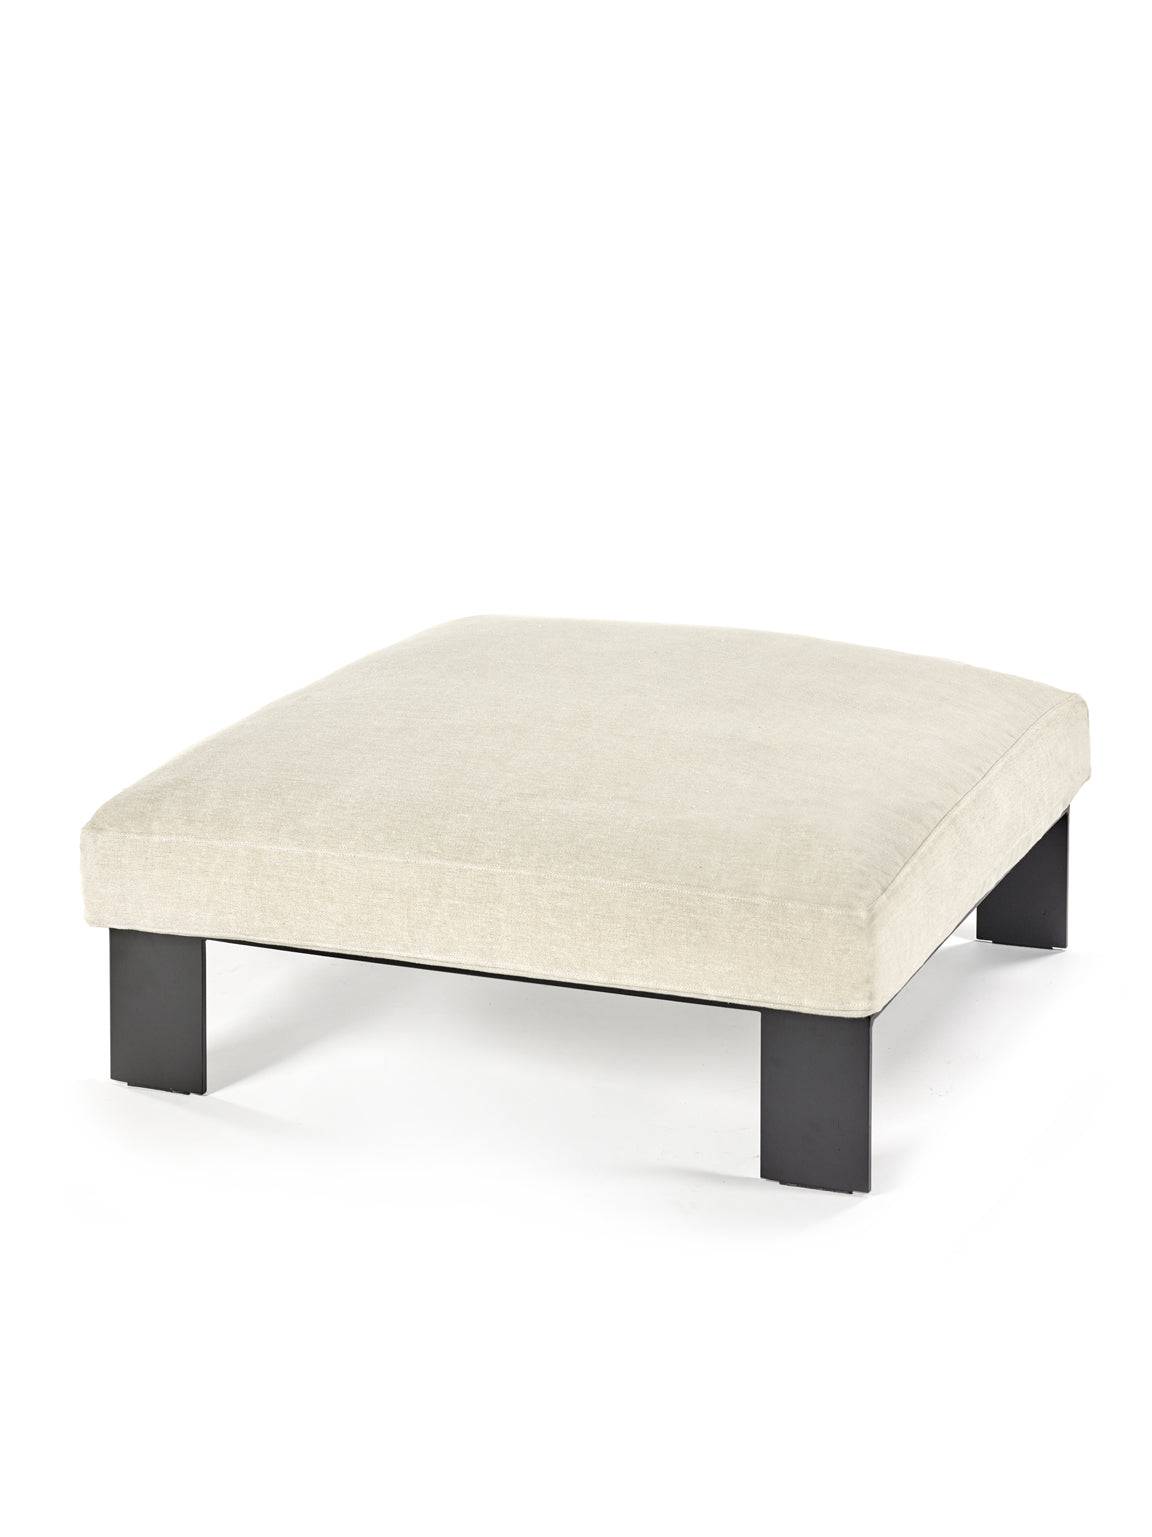 Mombaers Ottoman - Ivory - THAT COOL LIVING